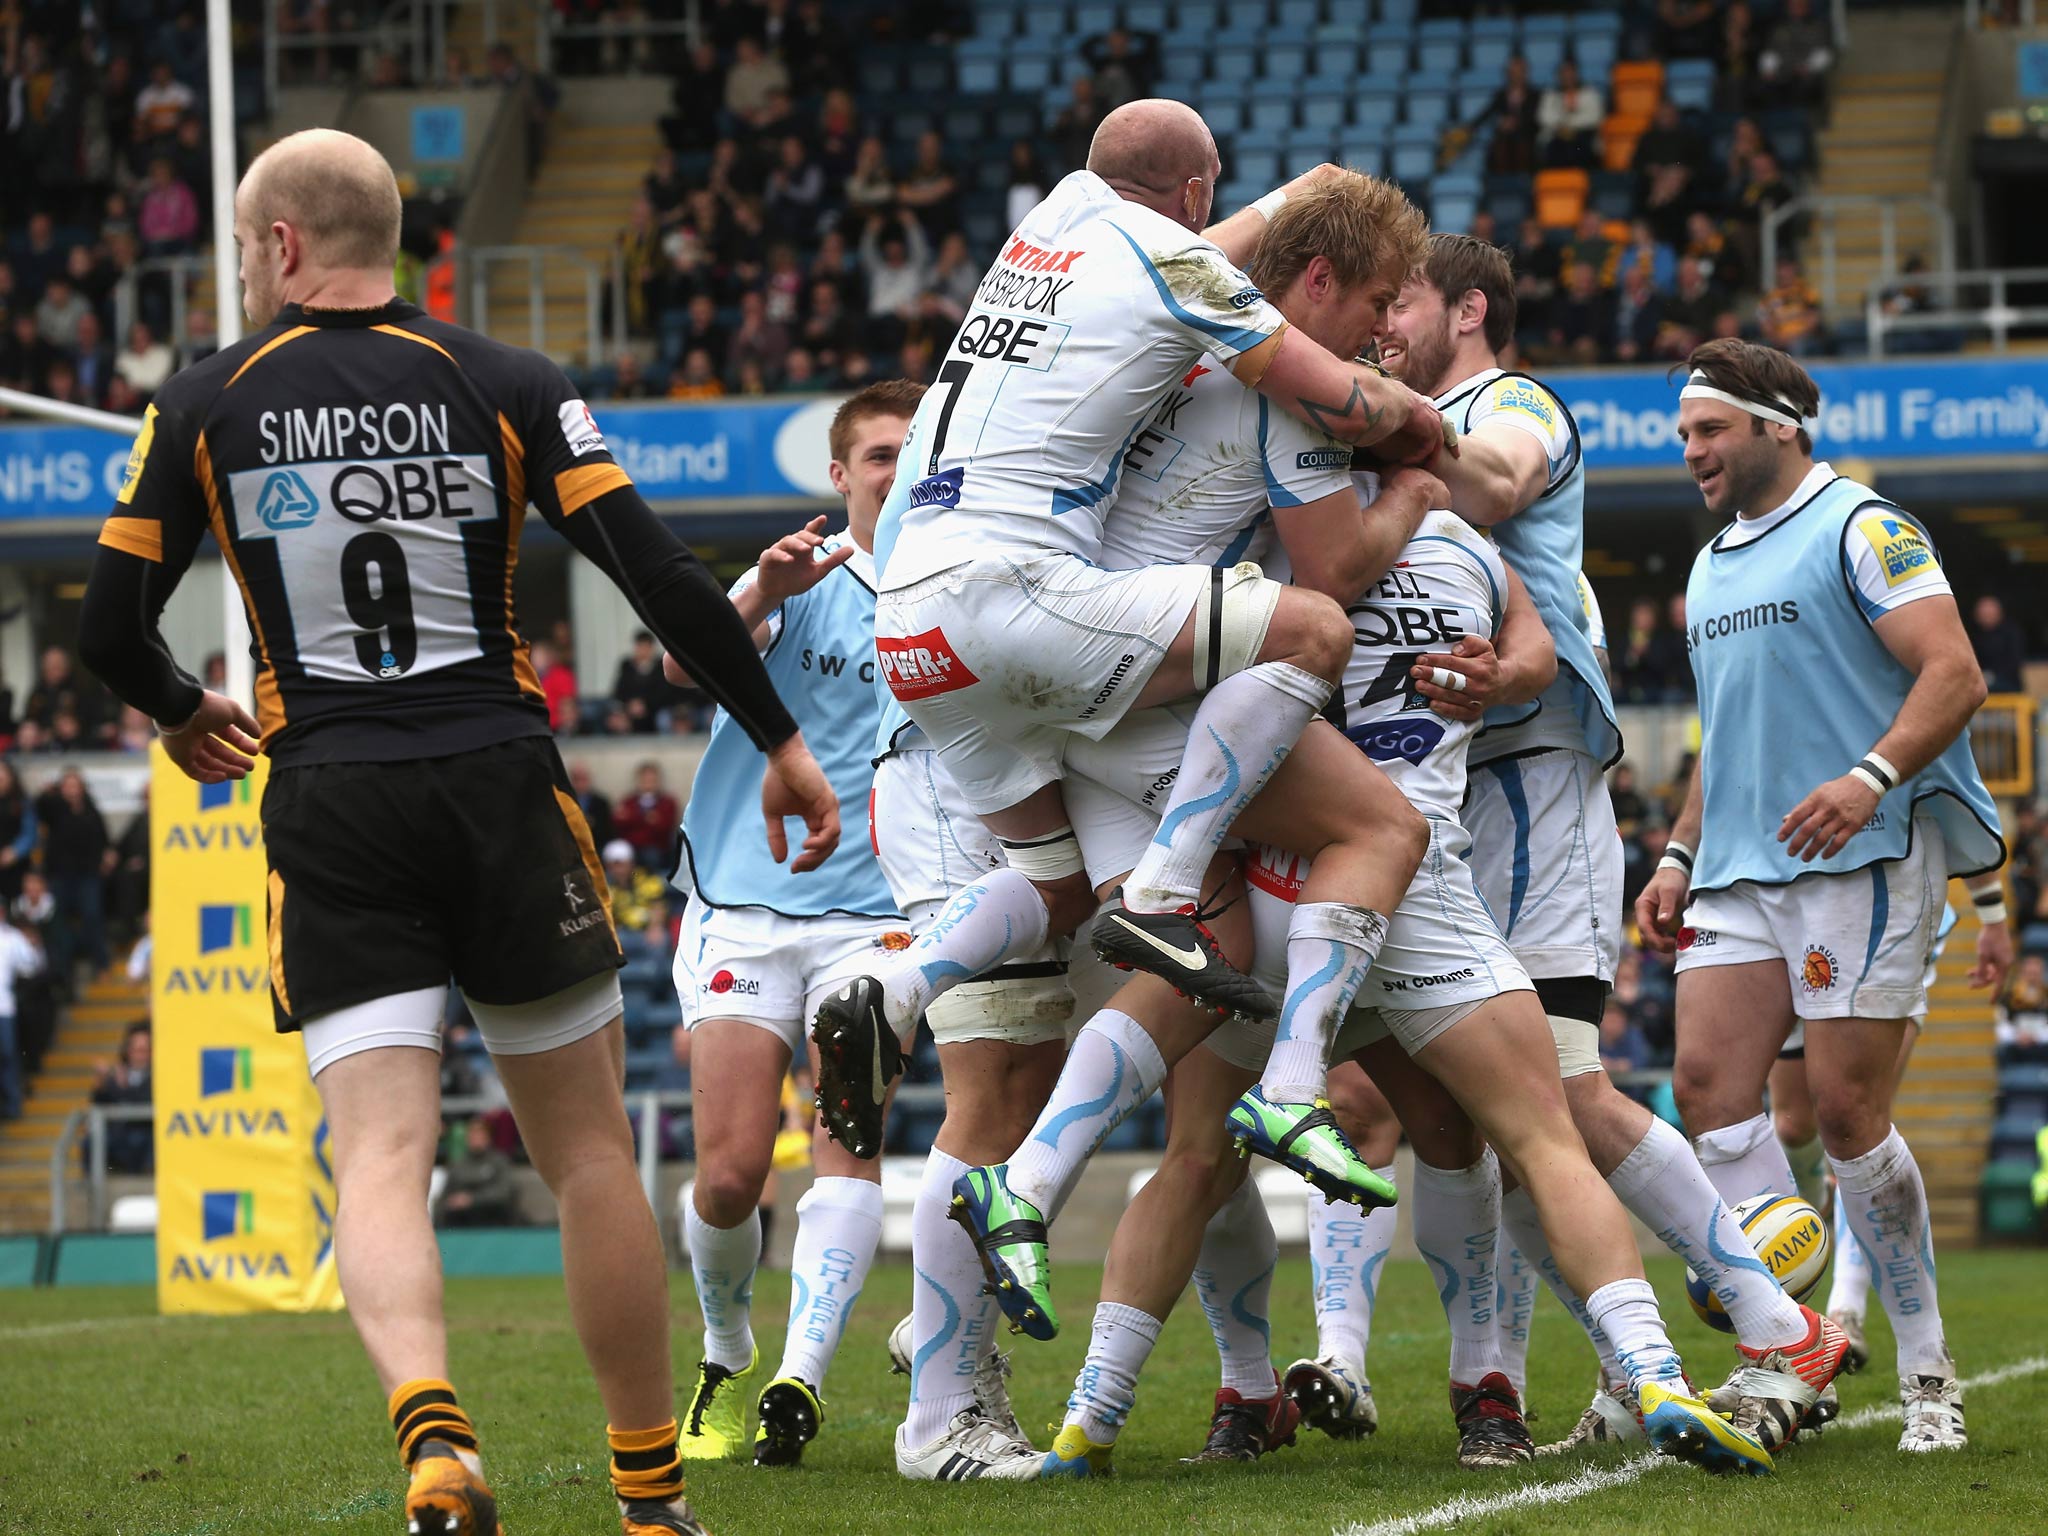 Exeter players celebrate after Jack Nowell scores a try during the Aviva Premiership match between London Wasps and Exeter Chiefs at Adams Park